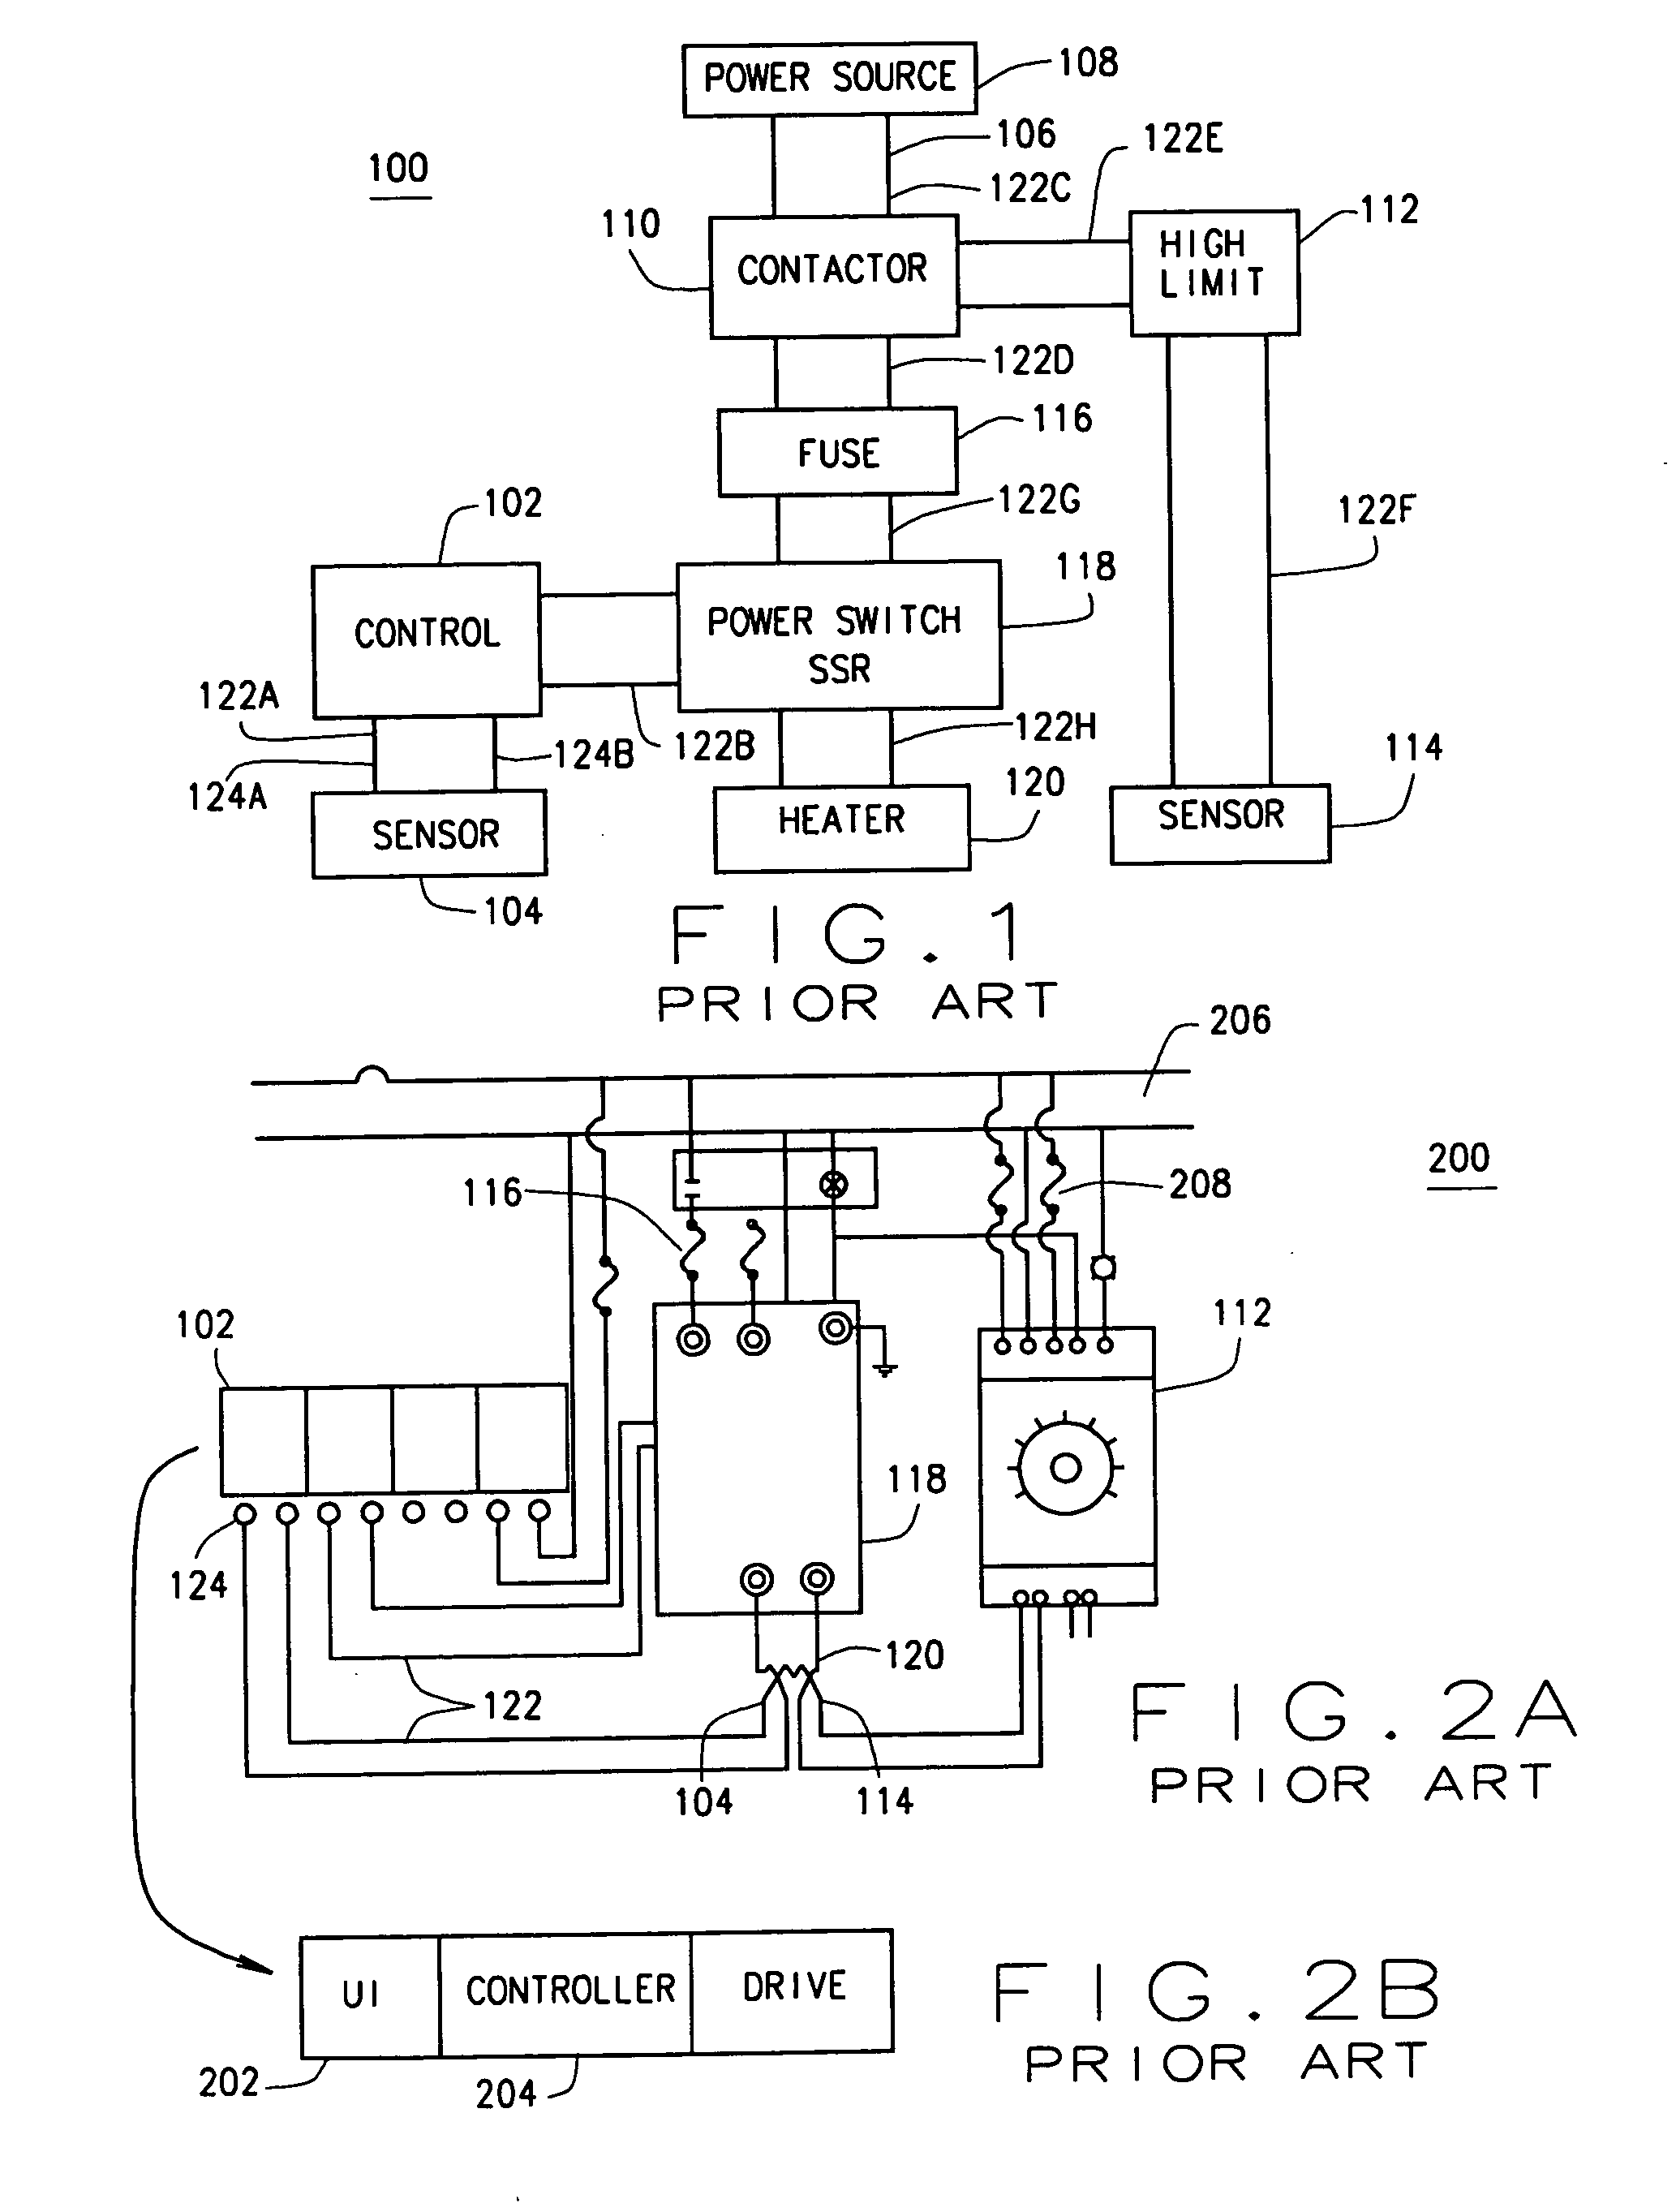 Integrally coupled power control system having a solid state relay